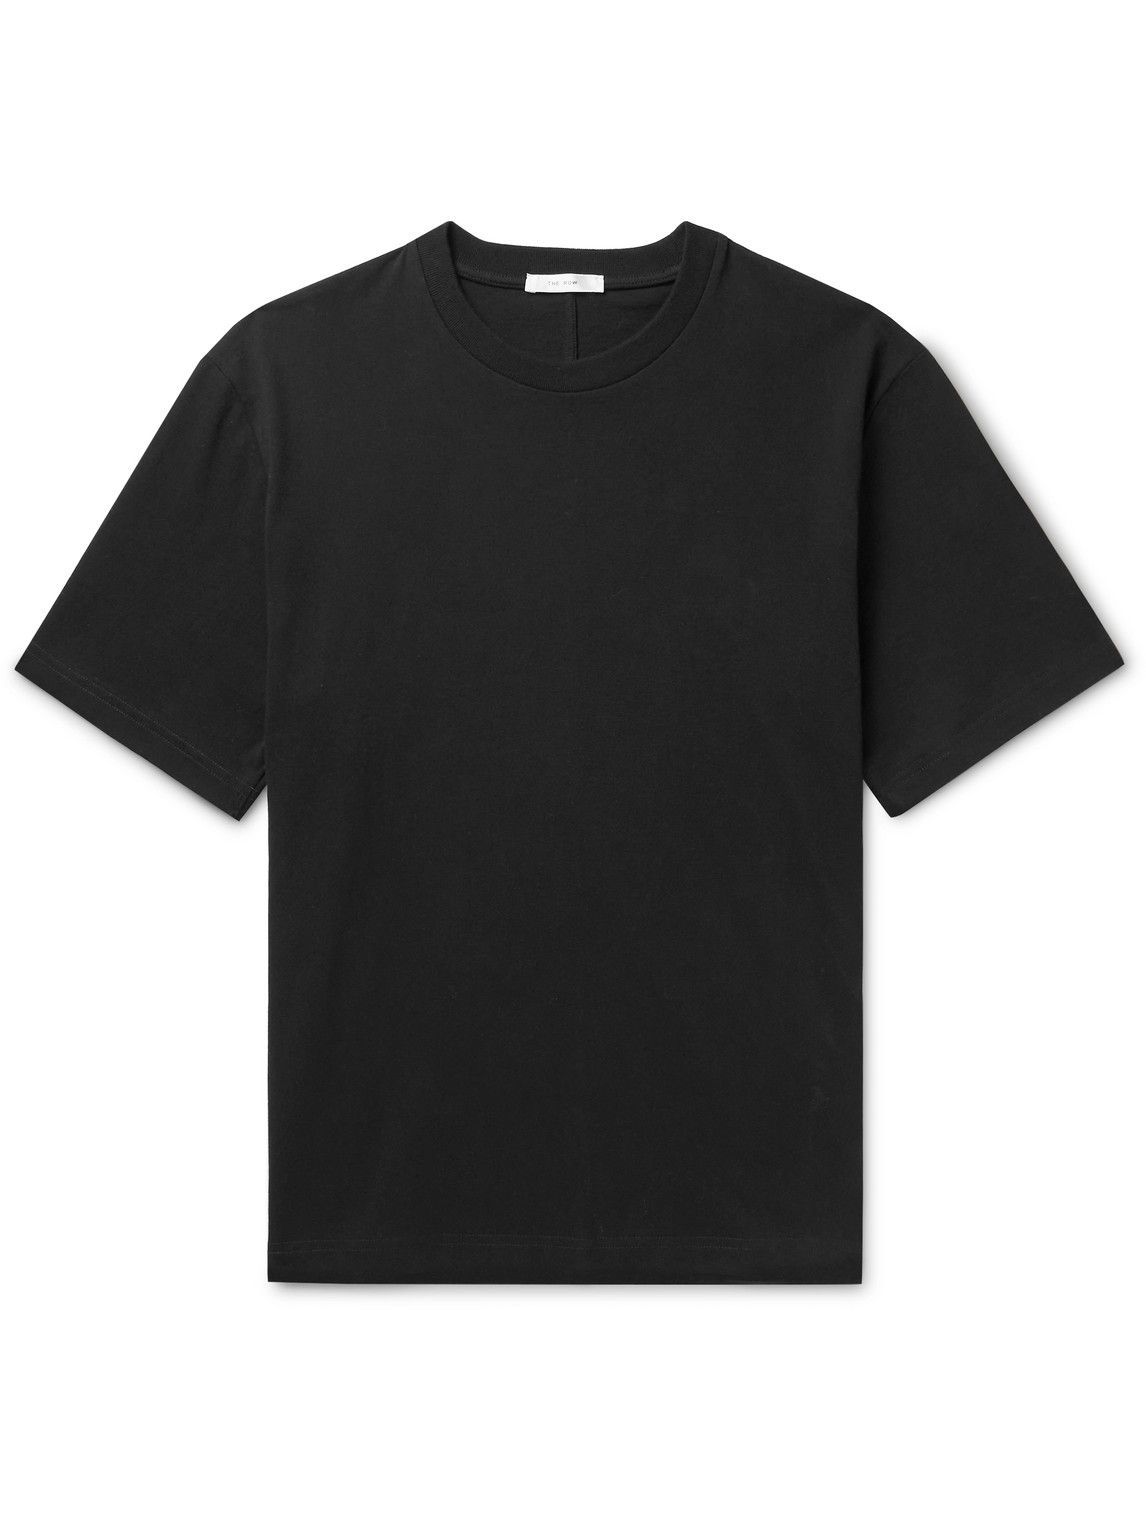 The Row - Errigal Cotton-Jersey T-Shirt - Black The Row